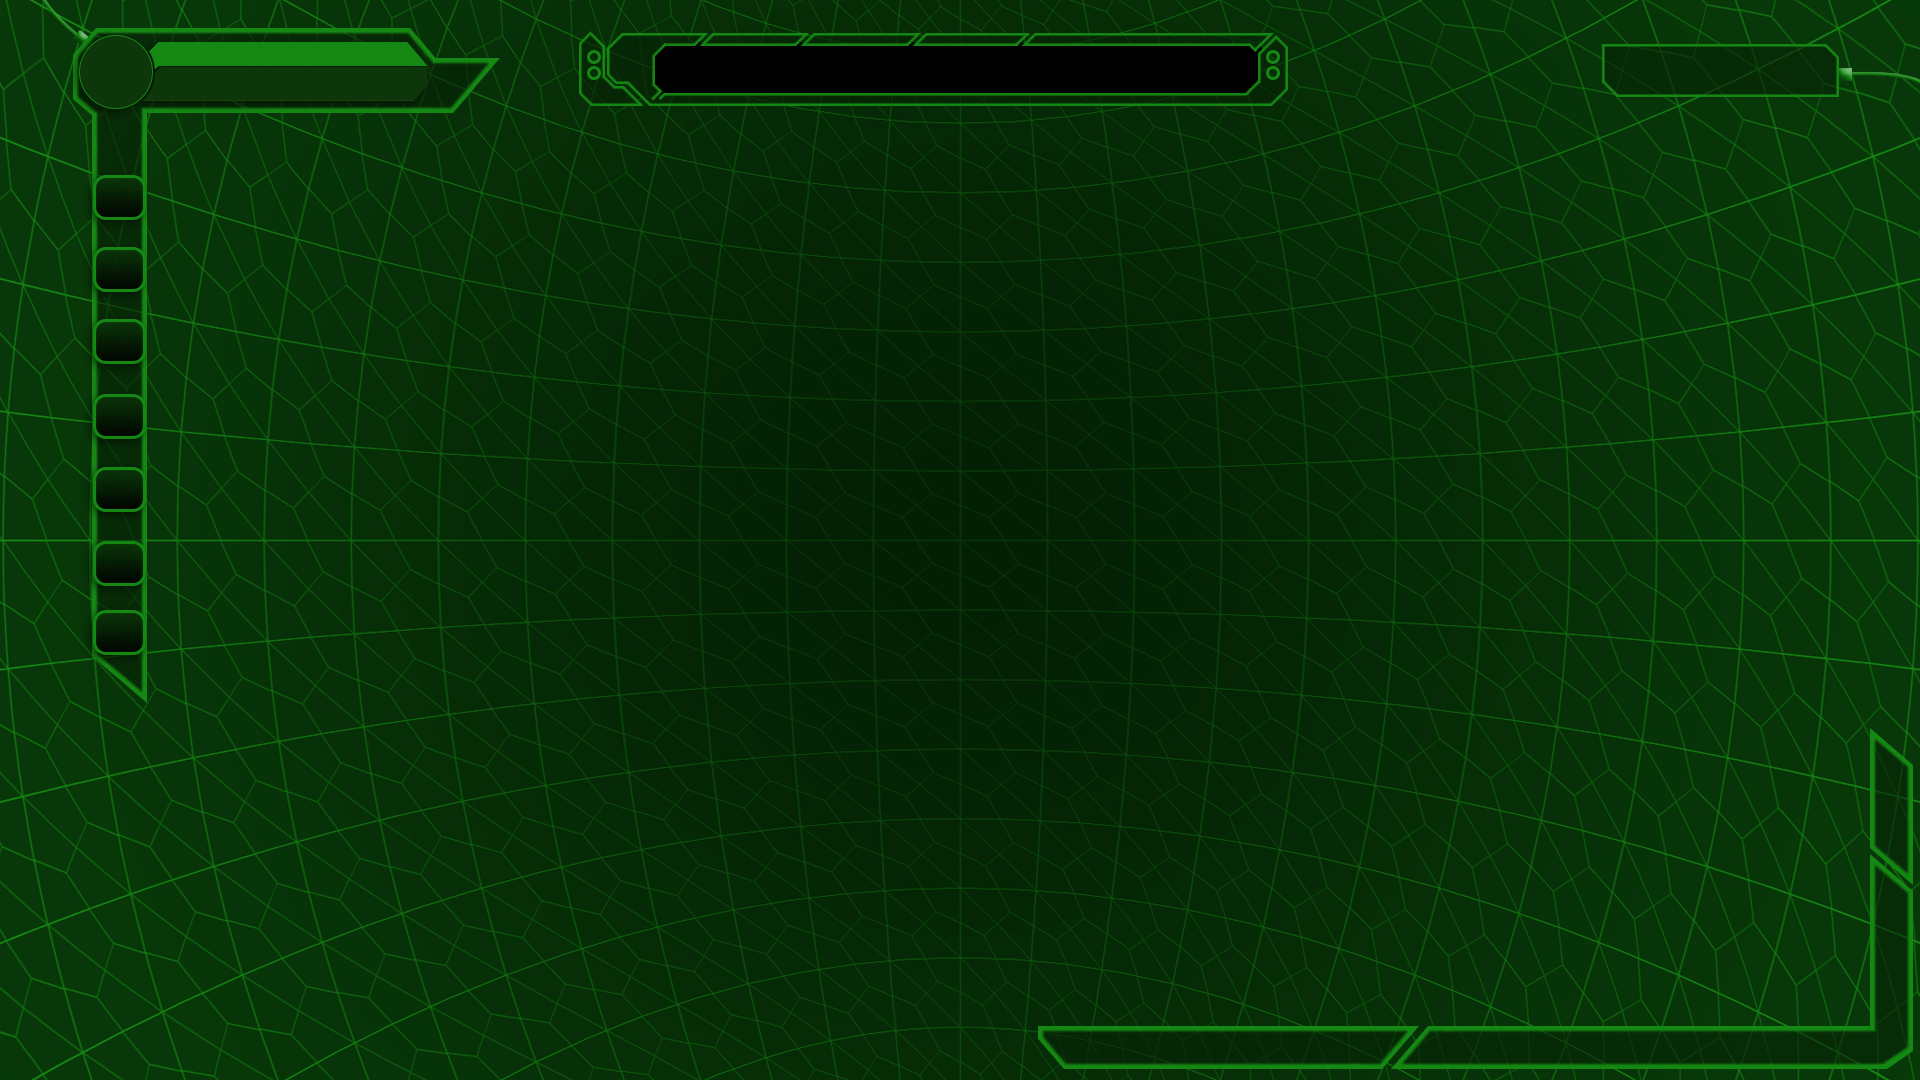 Old School Xbox dashboard theme with spherical background Overlay